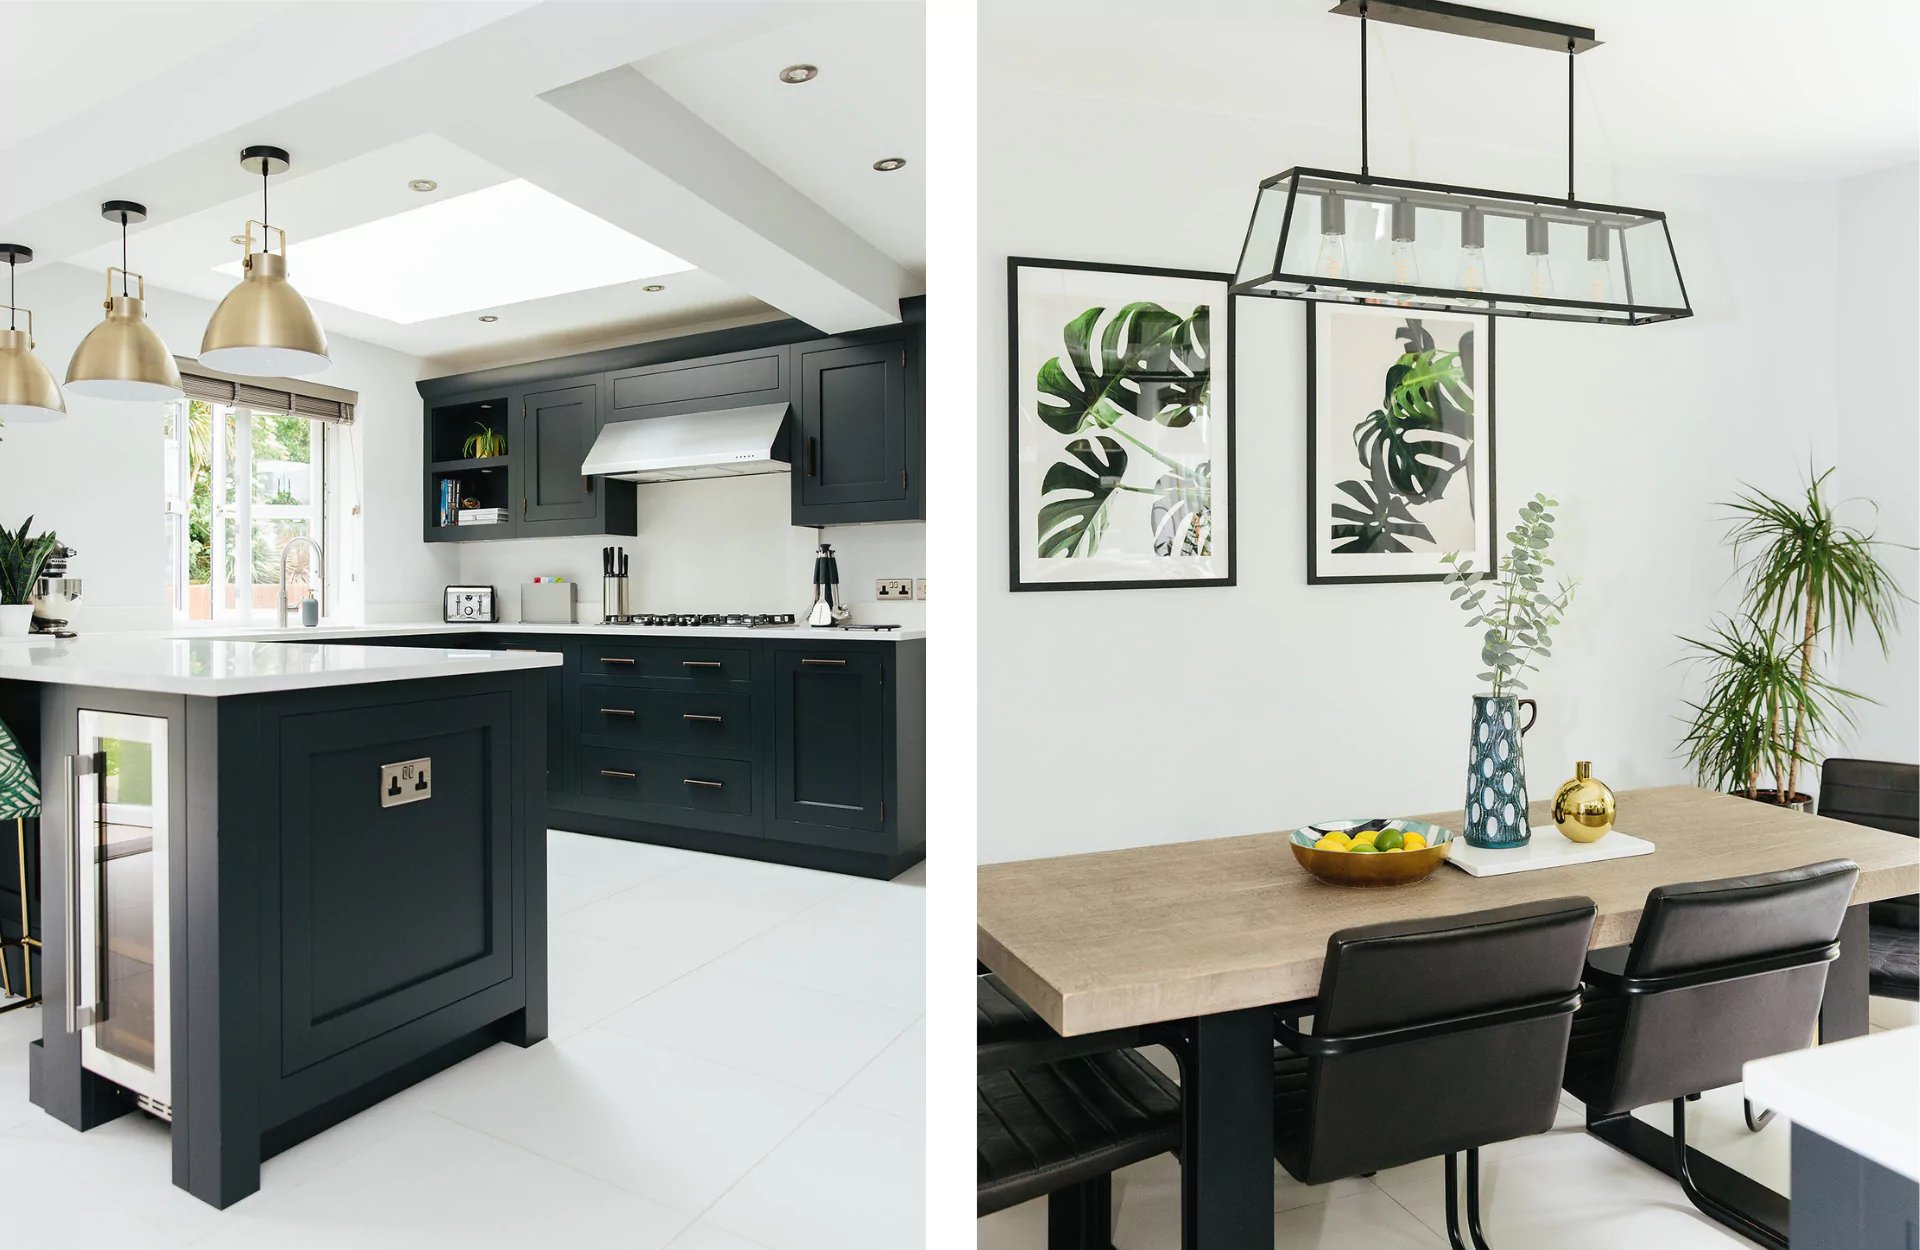 monochrome kitchen with botanical accents